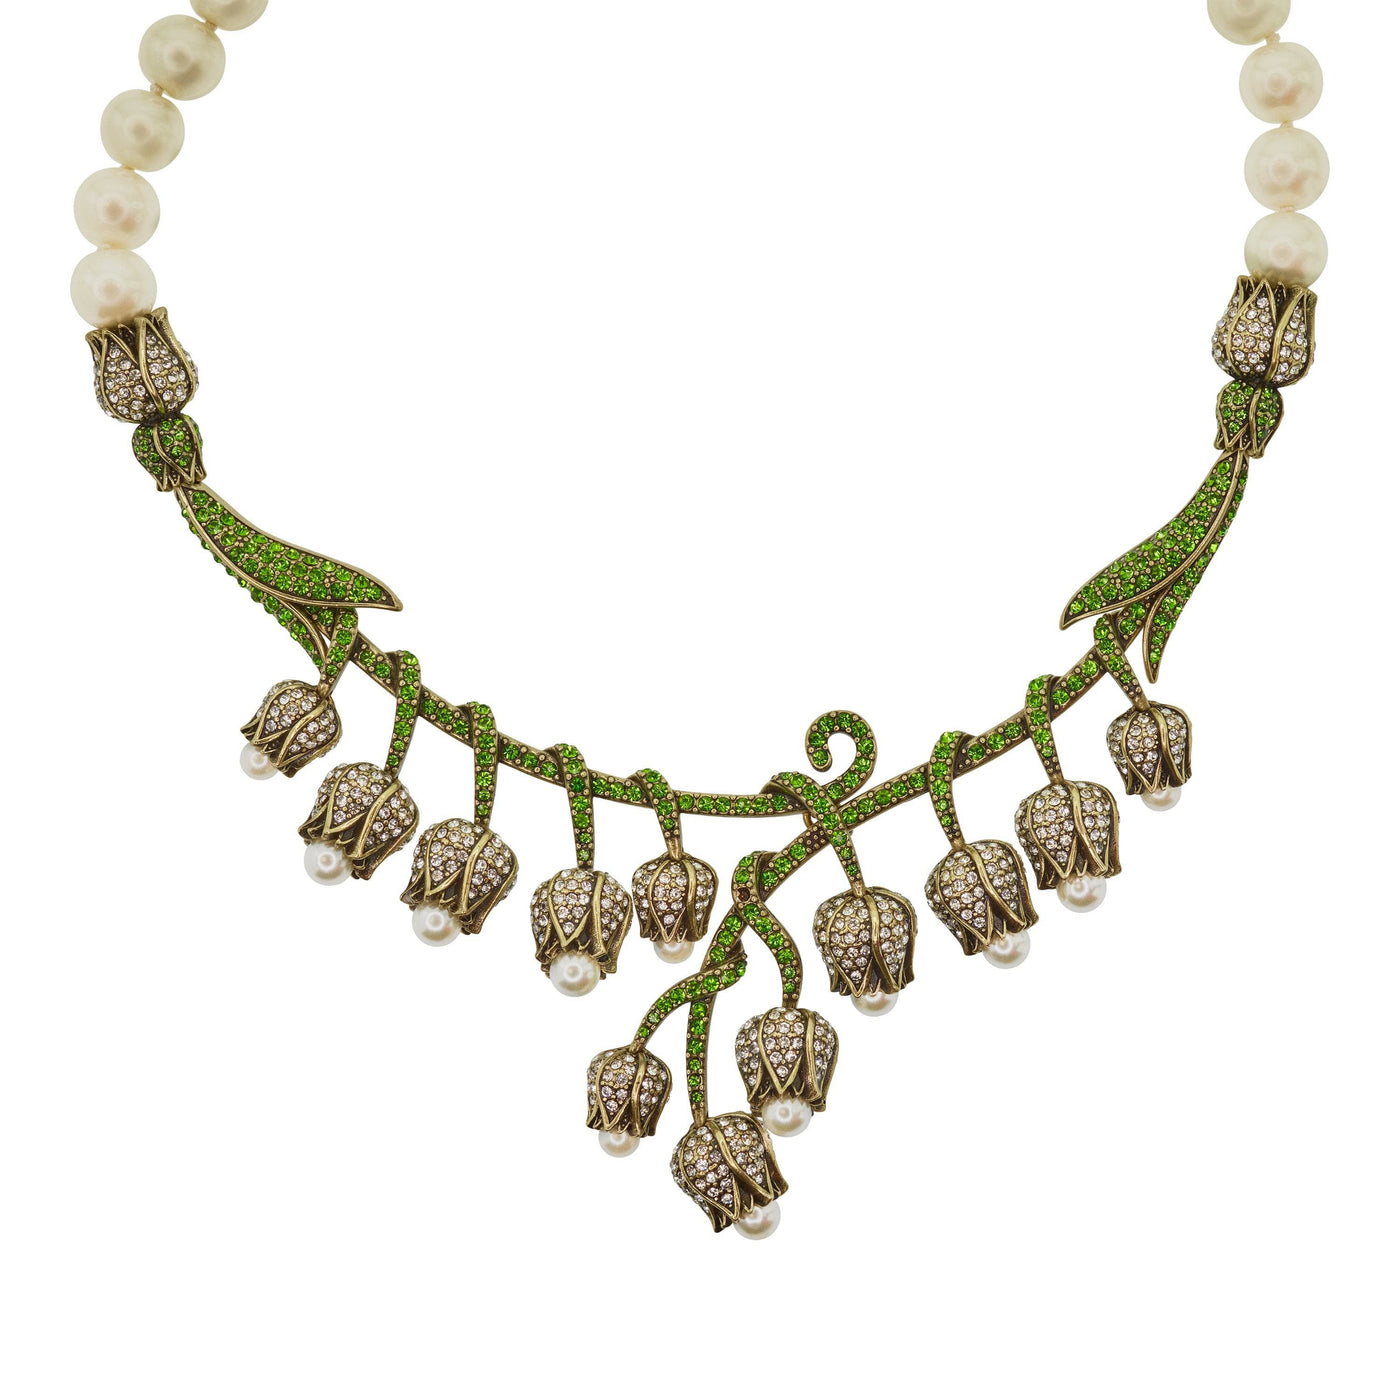 HEIDI DAUS®"Lily of the Valley" Beaded Crystal Floral Necklace